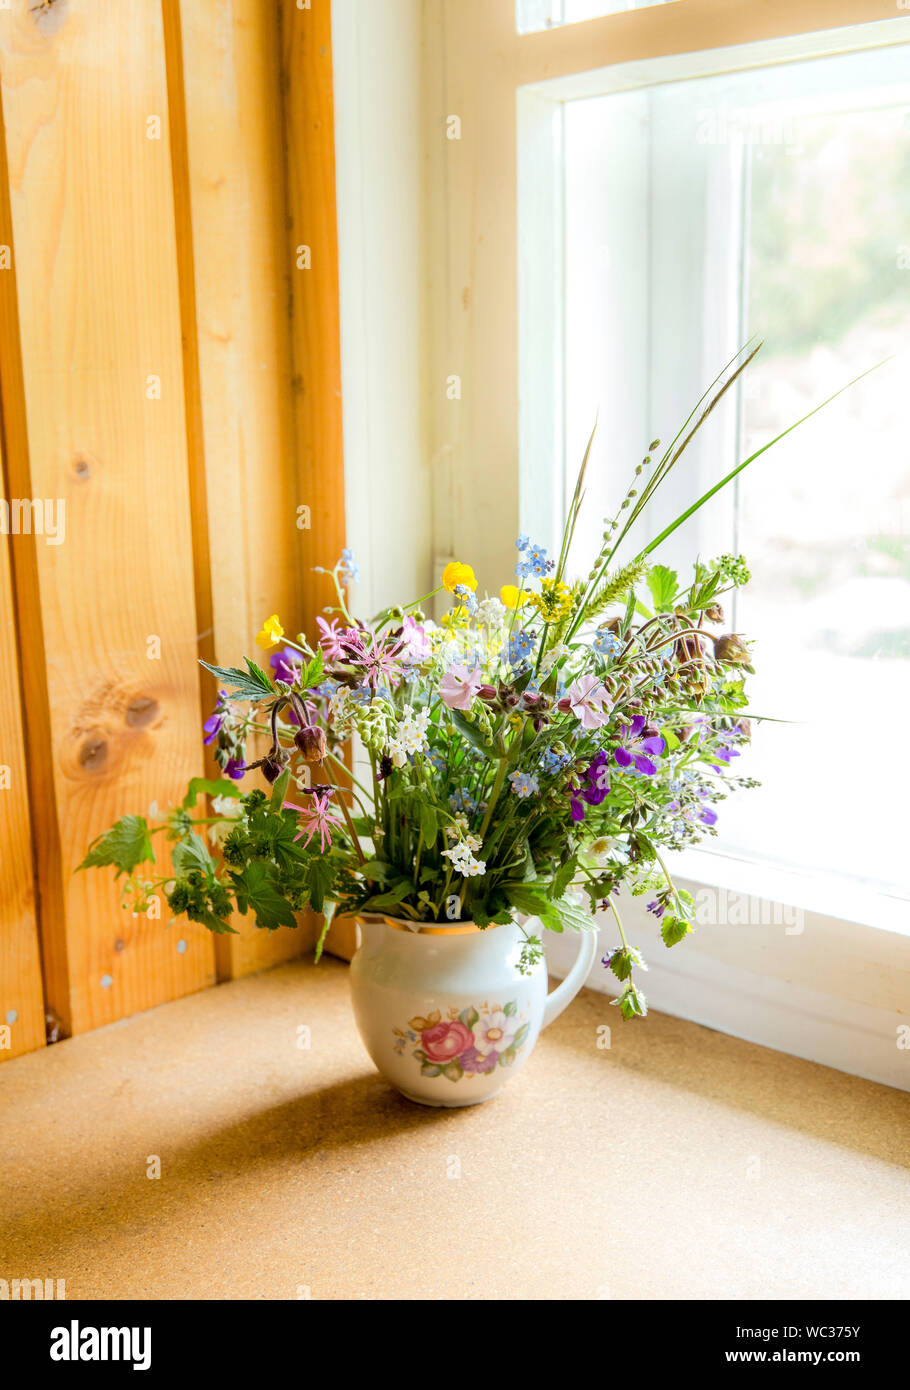 Vintage style flower bouquet made of wild flowers found in forest and meadow, standing in old cream jug on window sill, summers in grandma`s house con Stock Photo